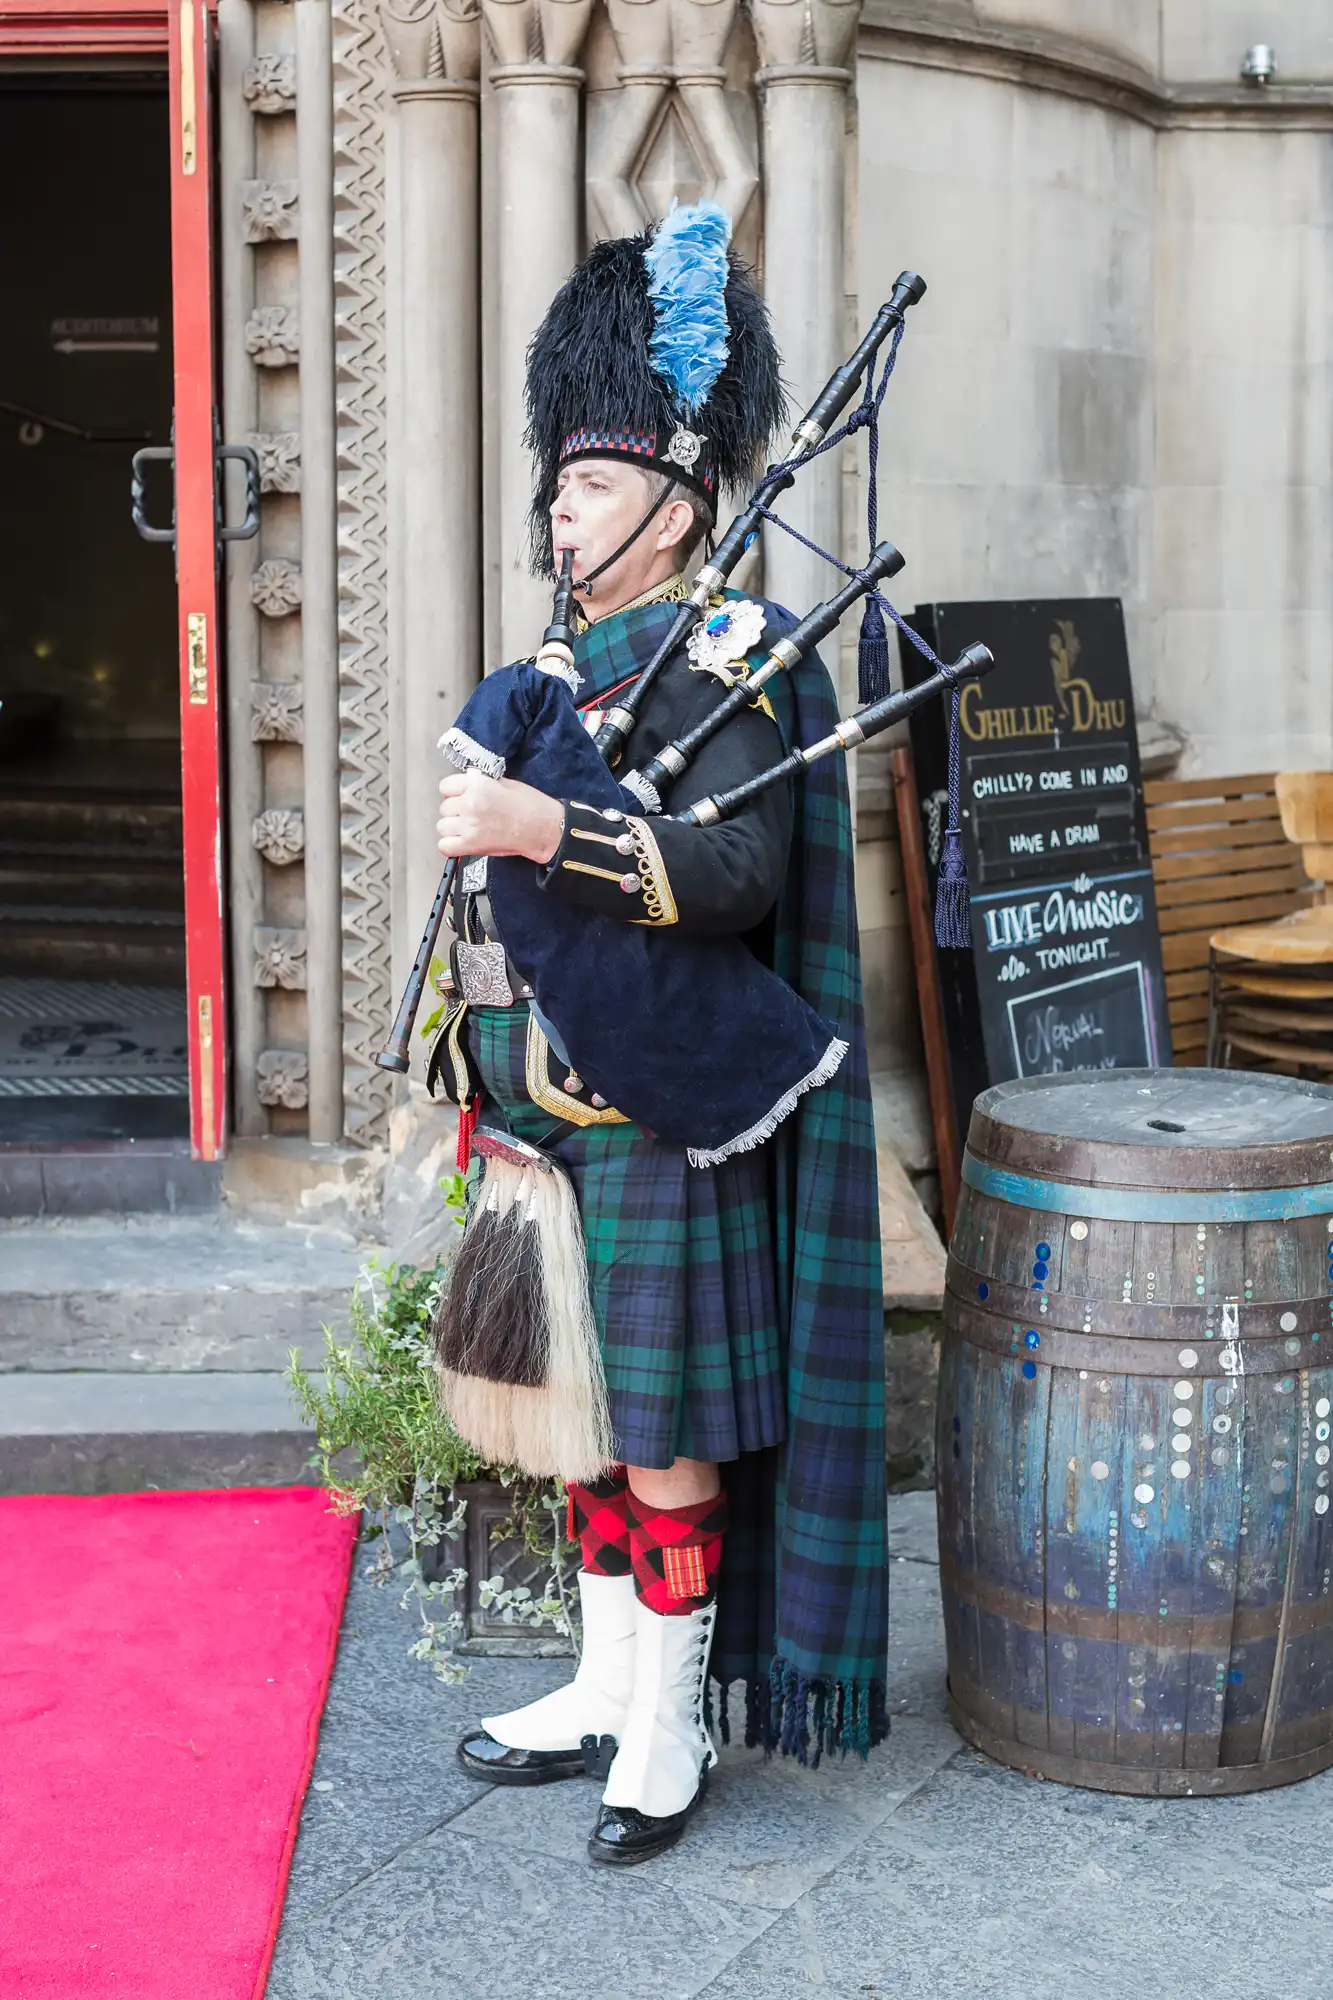 A man in traditional scottish attire playing bagpipes outside a building with a sign promoting live music.